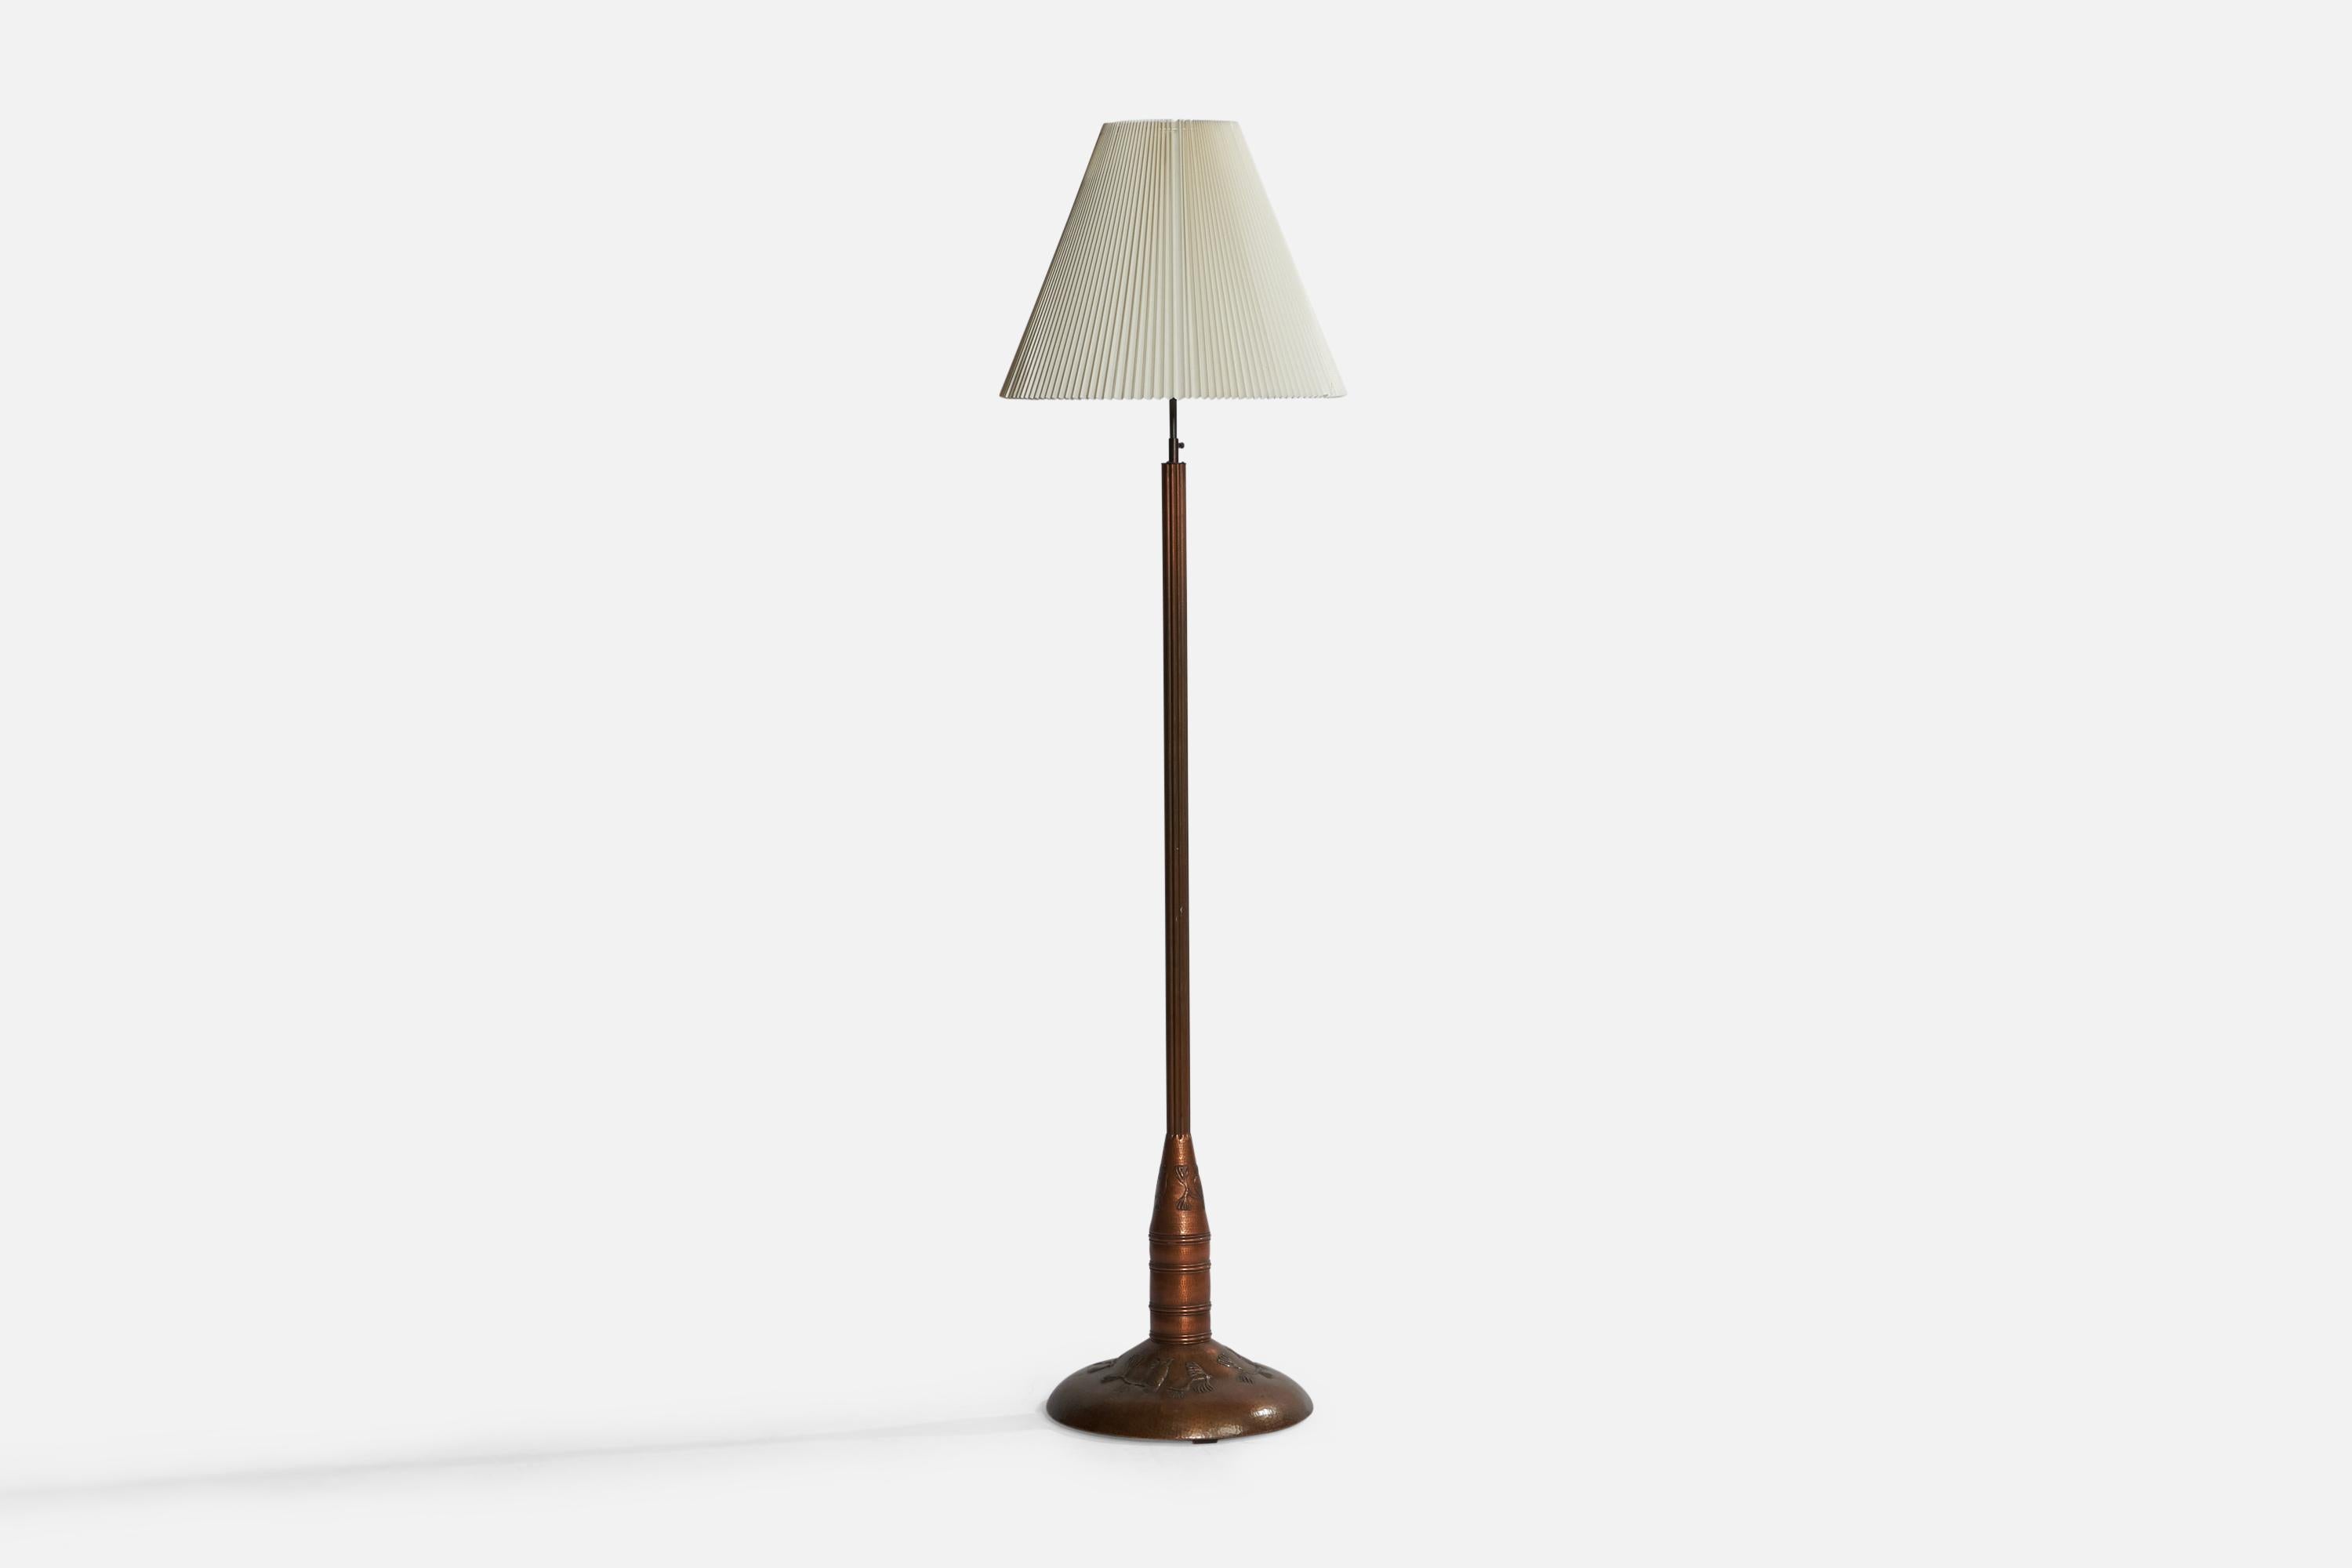 A sizeable copper, brass and paper floor lamp designed and produced in Sweden, 1920s.

Overall Dimensions (inches): 78.75” H x 20.75” Diameter. Stated dimensions include shade.
Bulb Specifications: E-26 Bulbs
Number of Sockets: 2
All lighting will